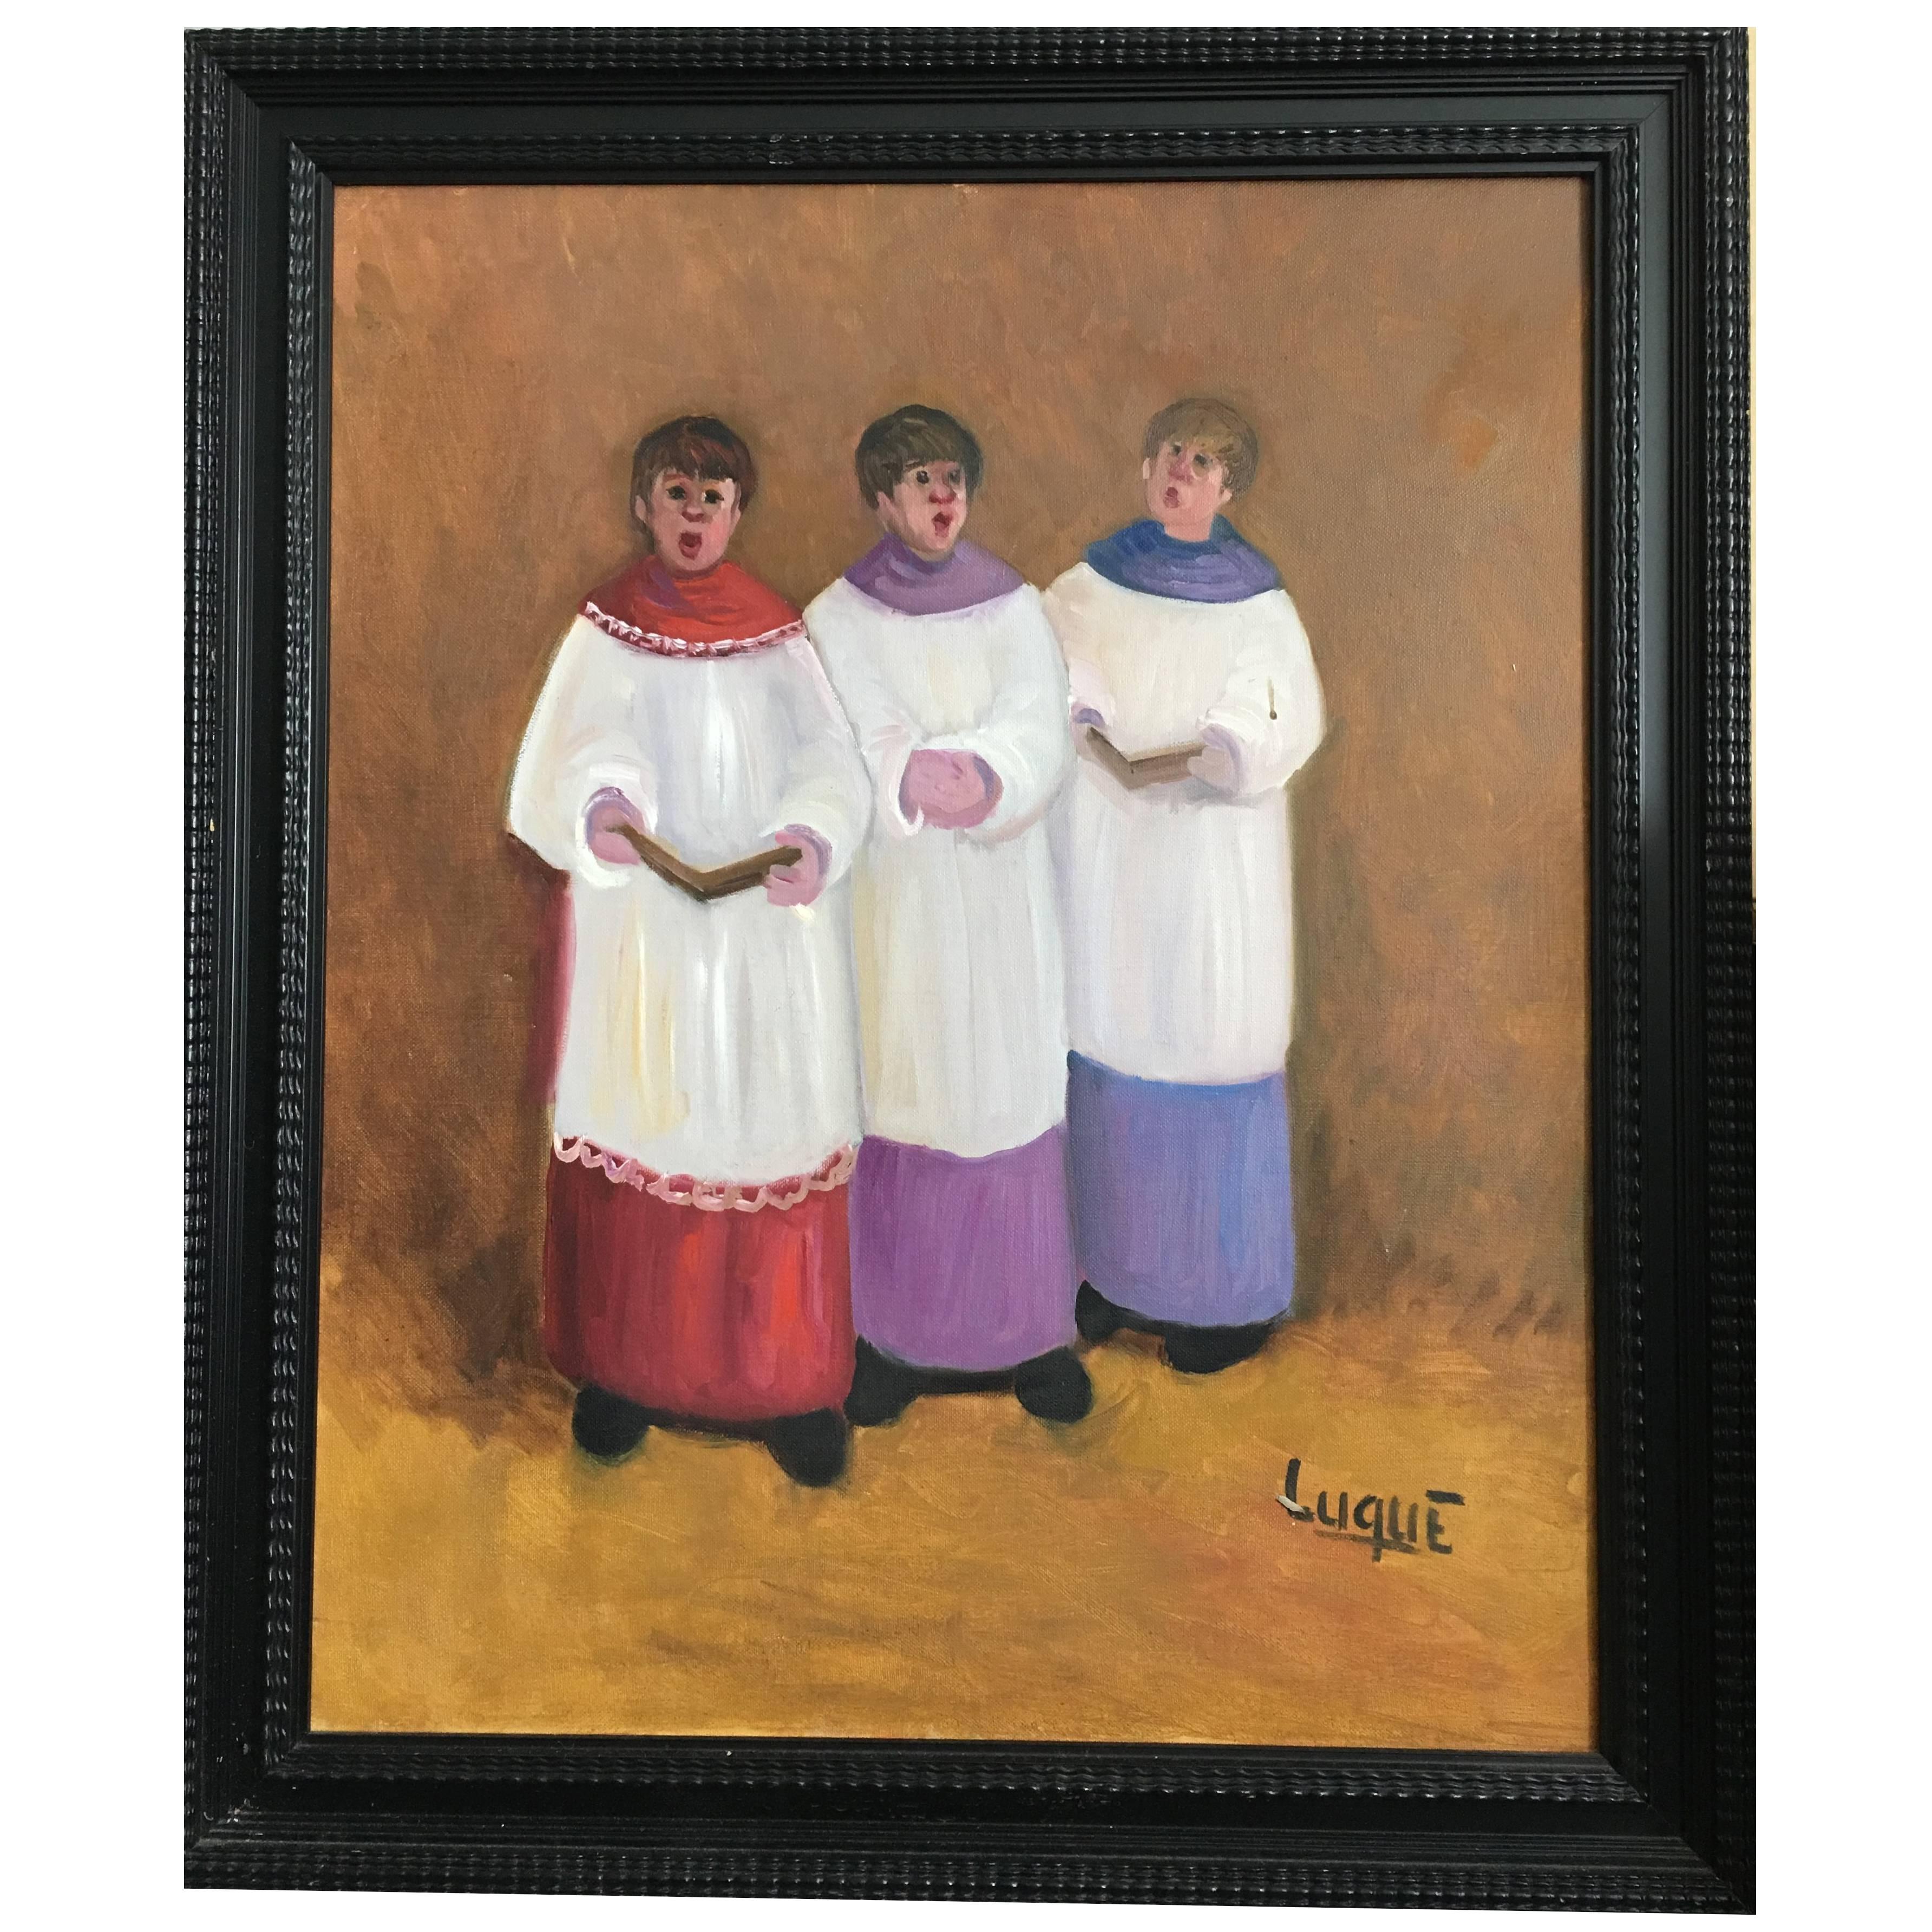 Choirboys Singing in Altar by Luque, Spain For Sale